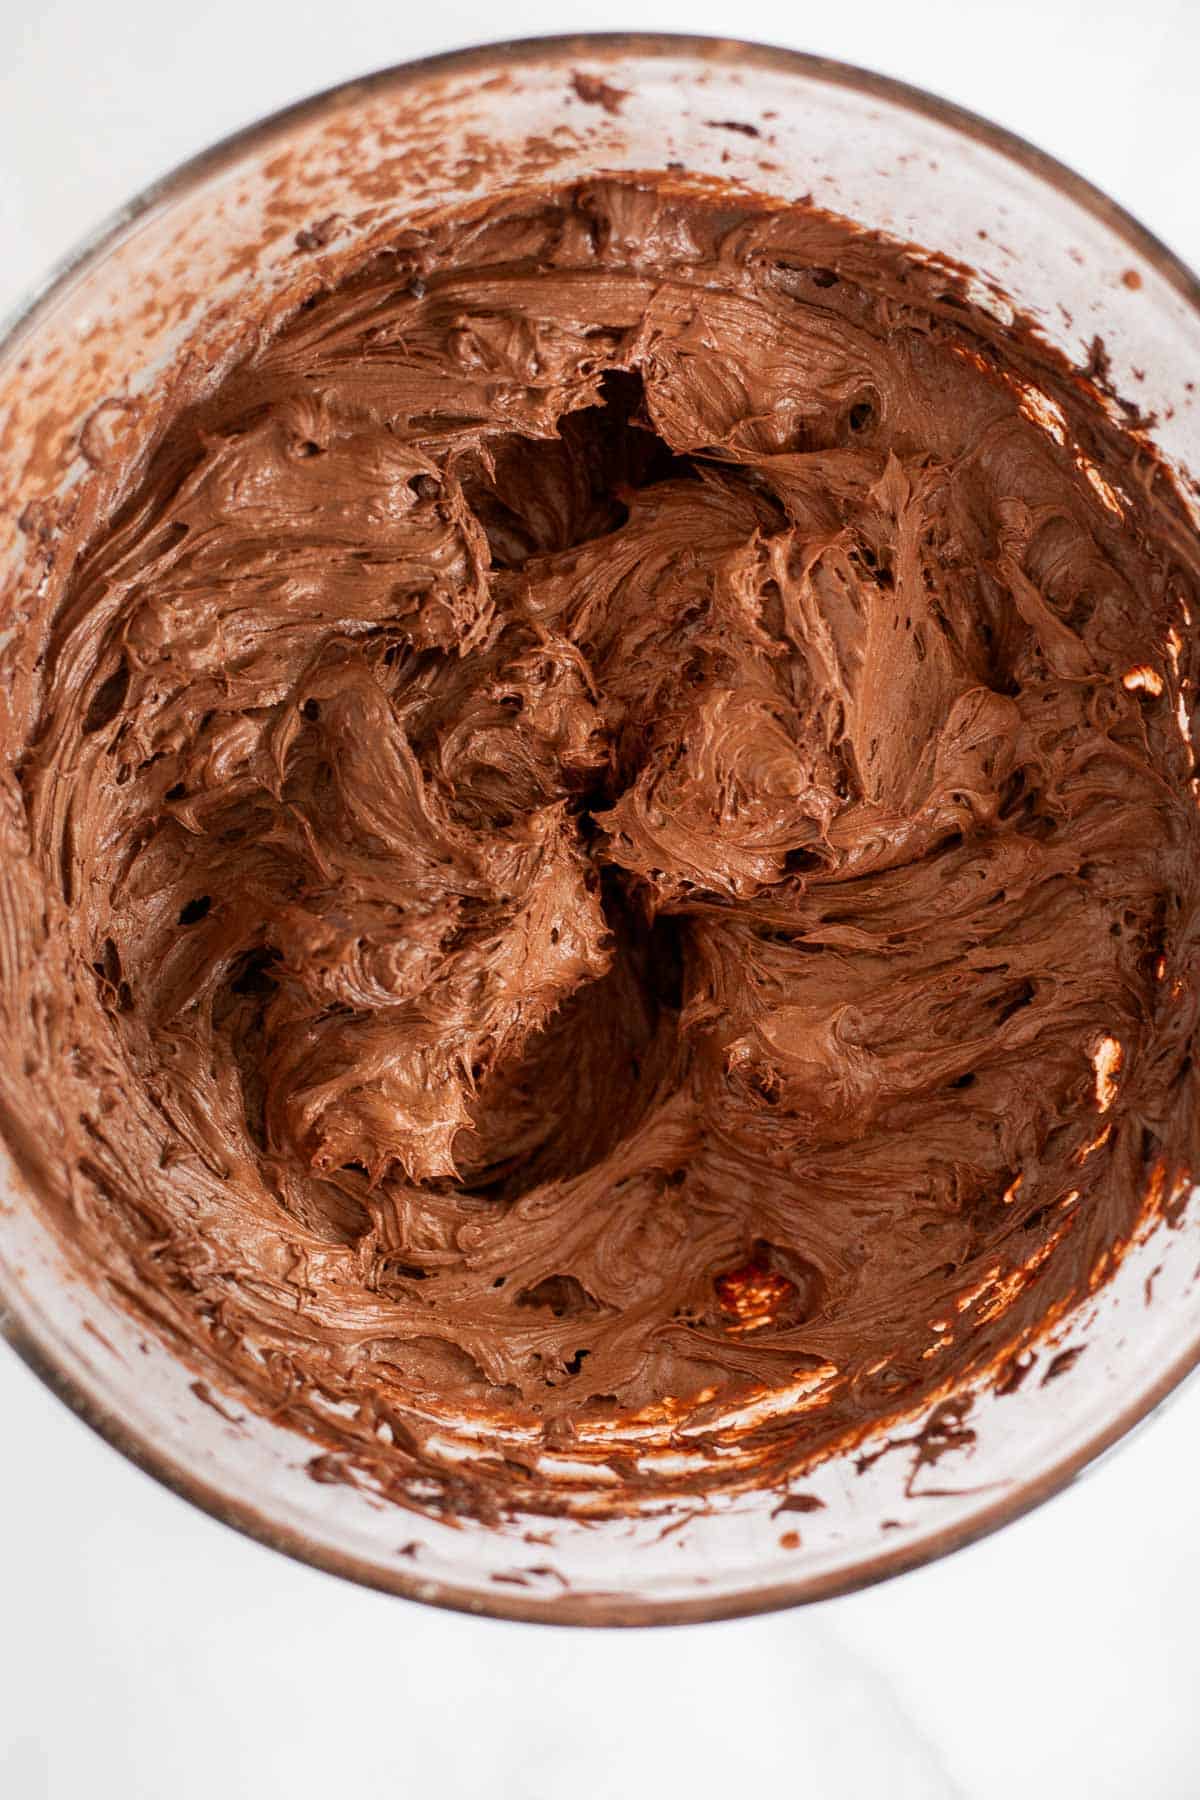 Fudgy chocolate frosting in a glass bowl.